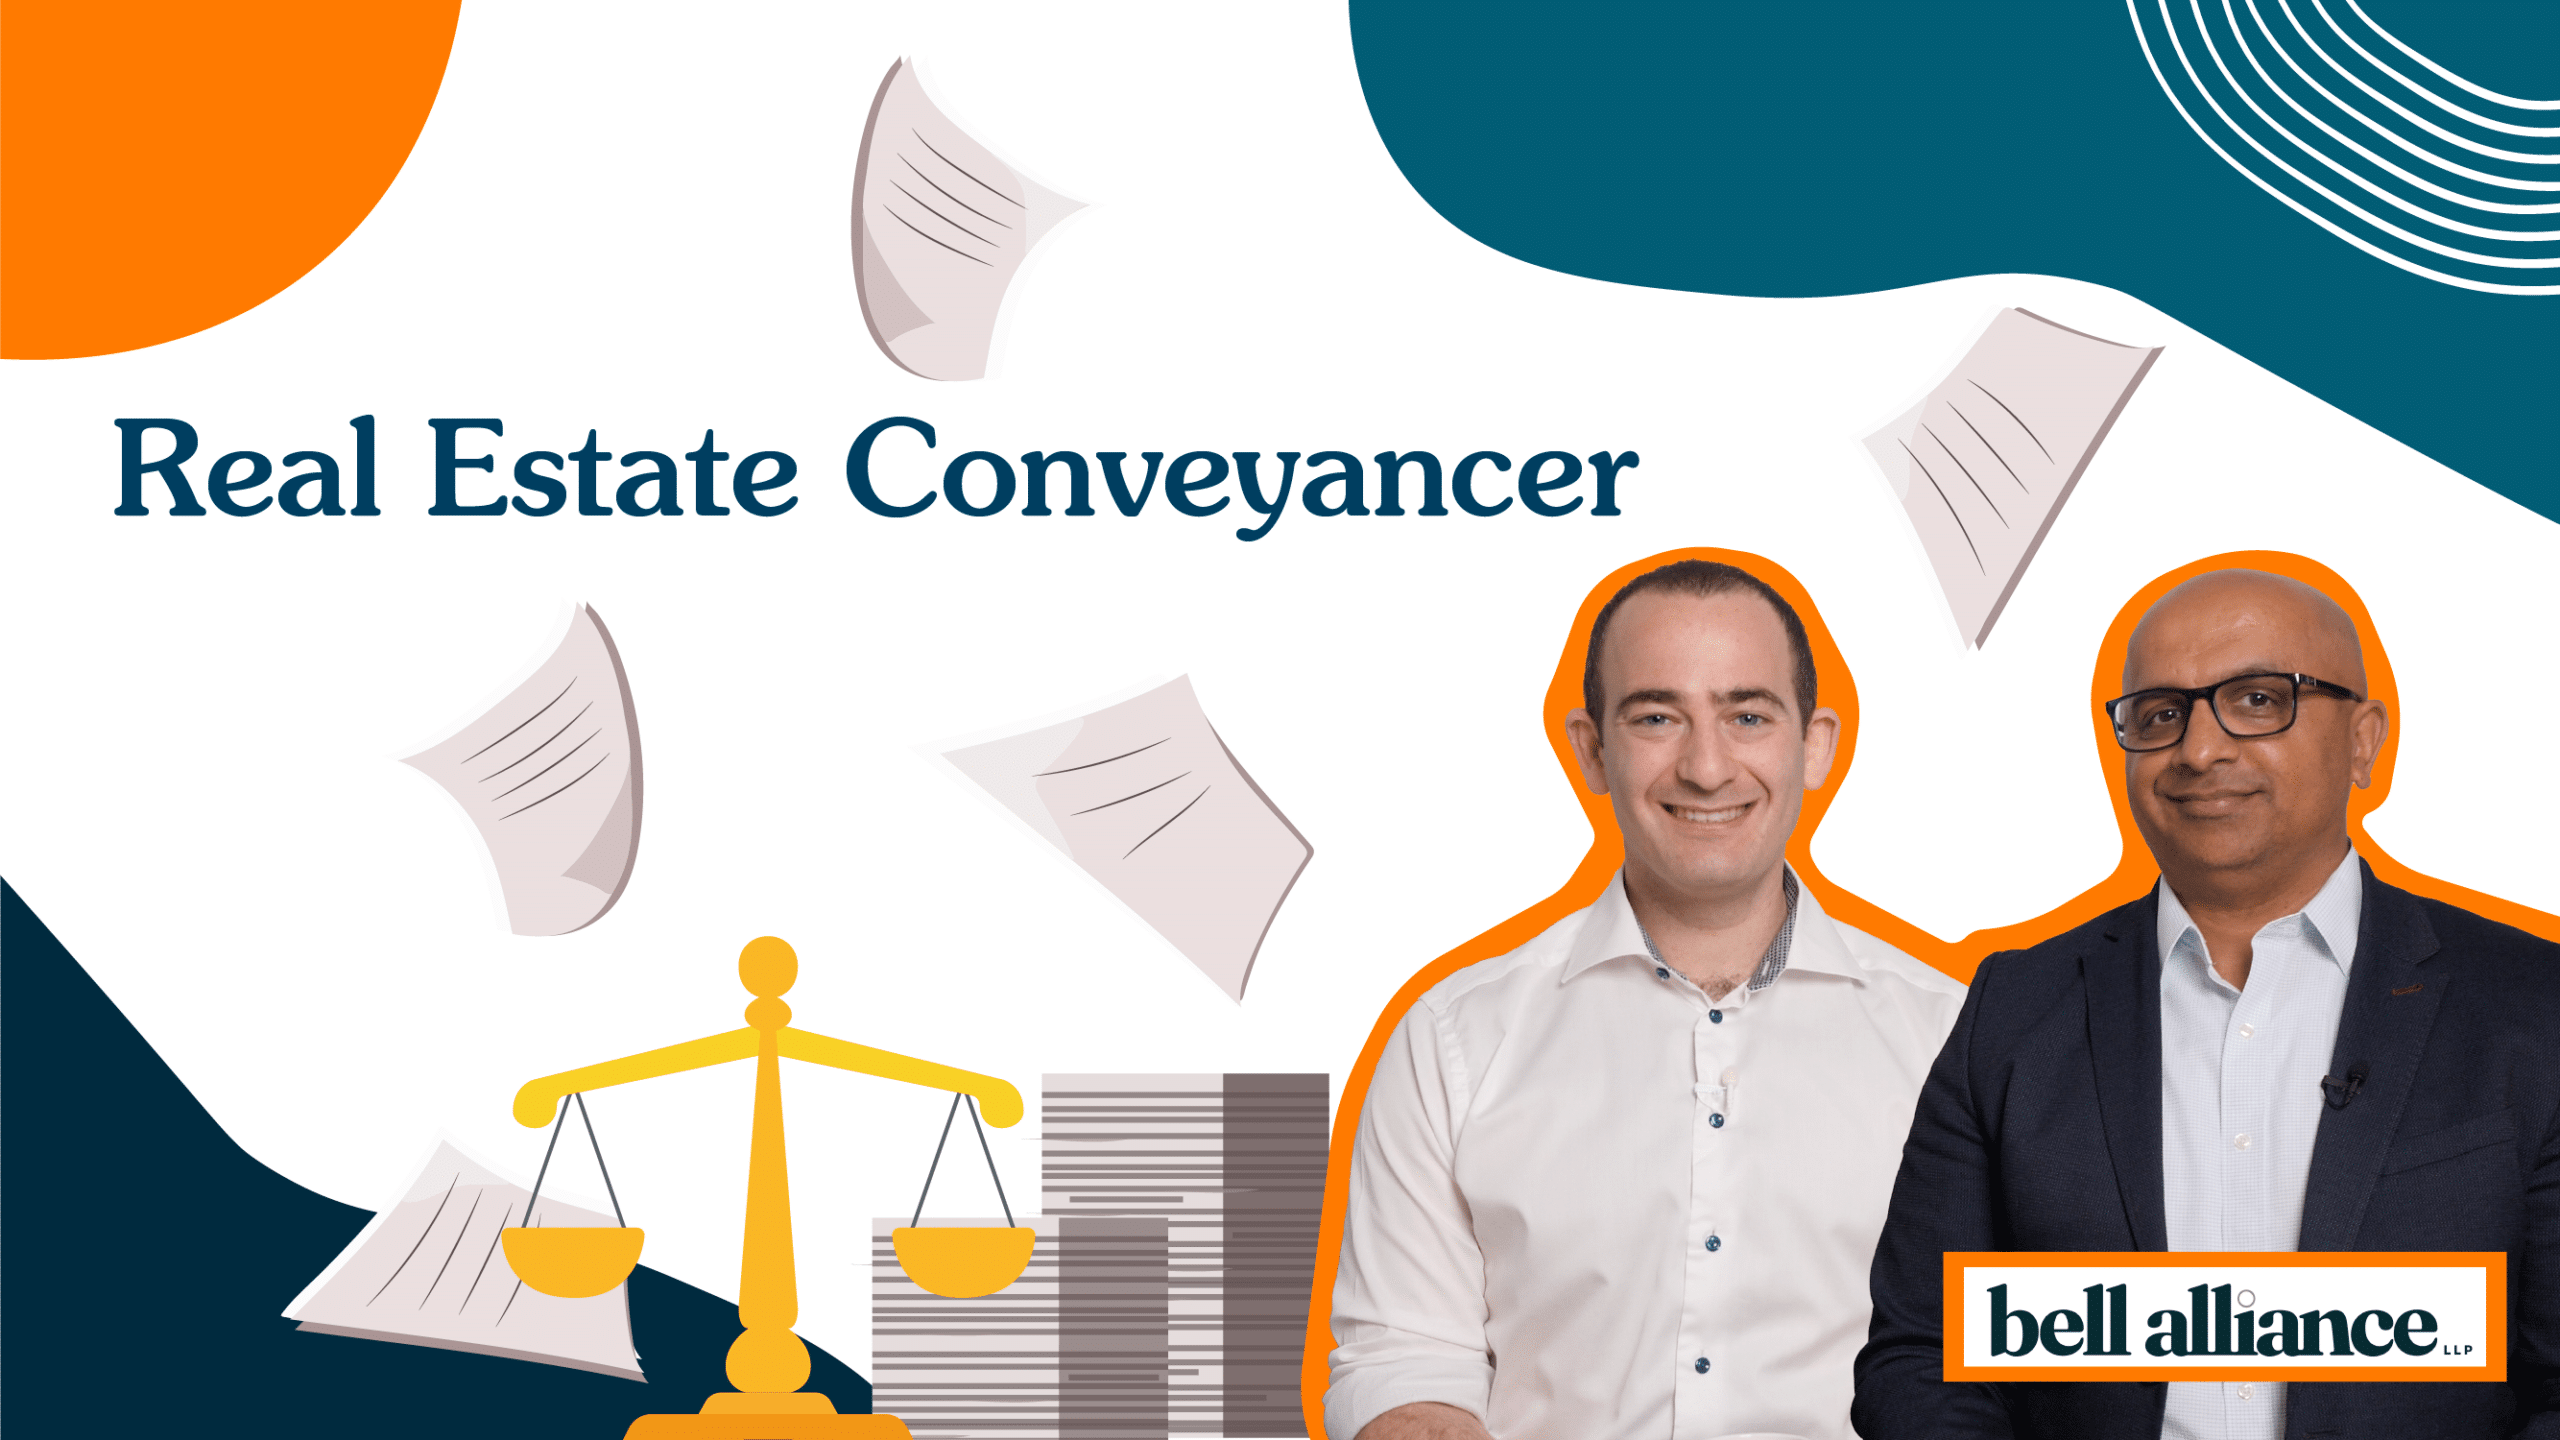 Real estate lawyer Khushhal Baines explains the real estate conveyance process, why it’s important, and what home buyers can do to prepare.